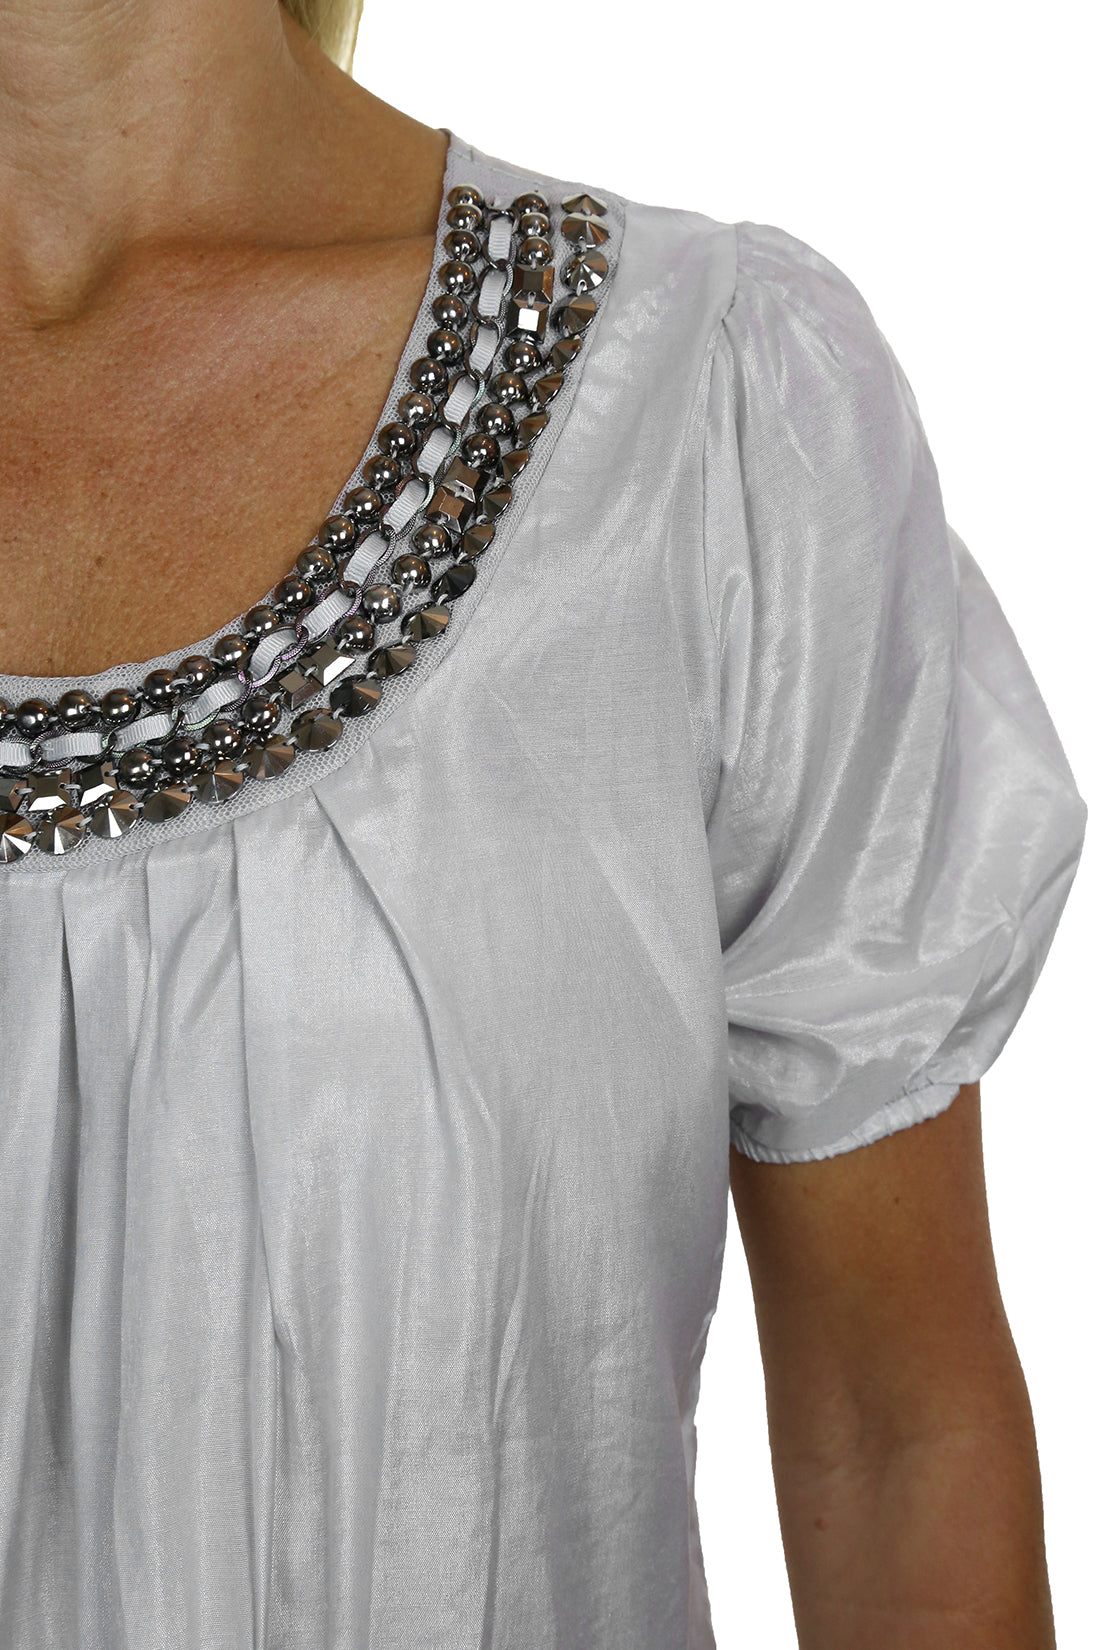 Tunic Top With Silver Bead Stud Detail Silver